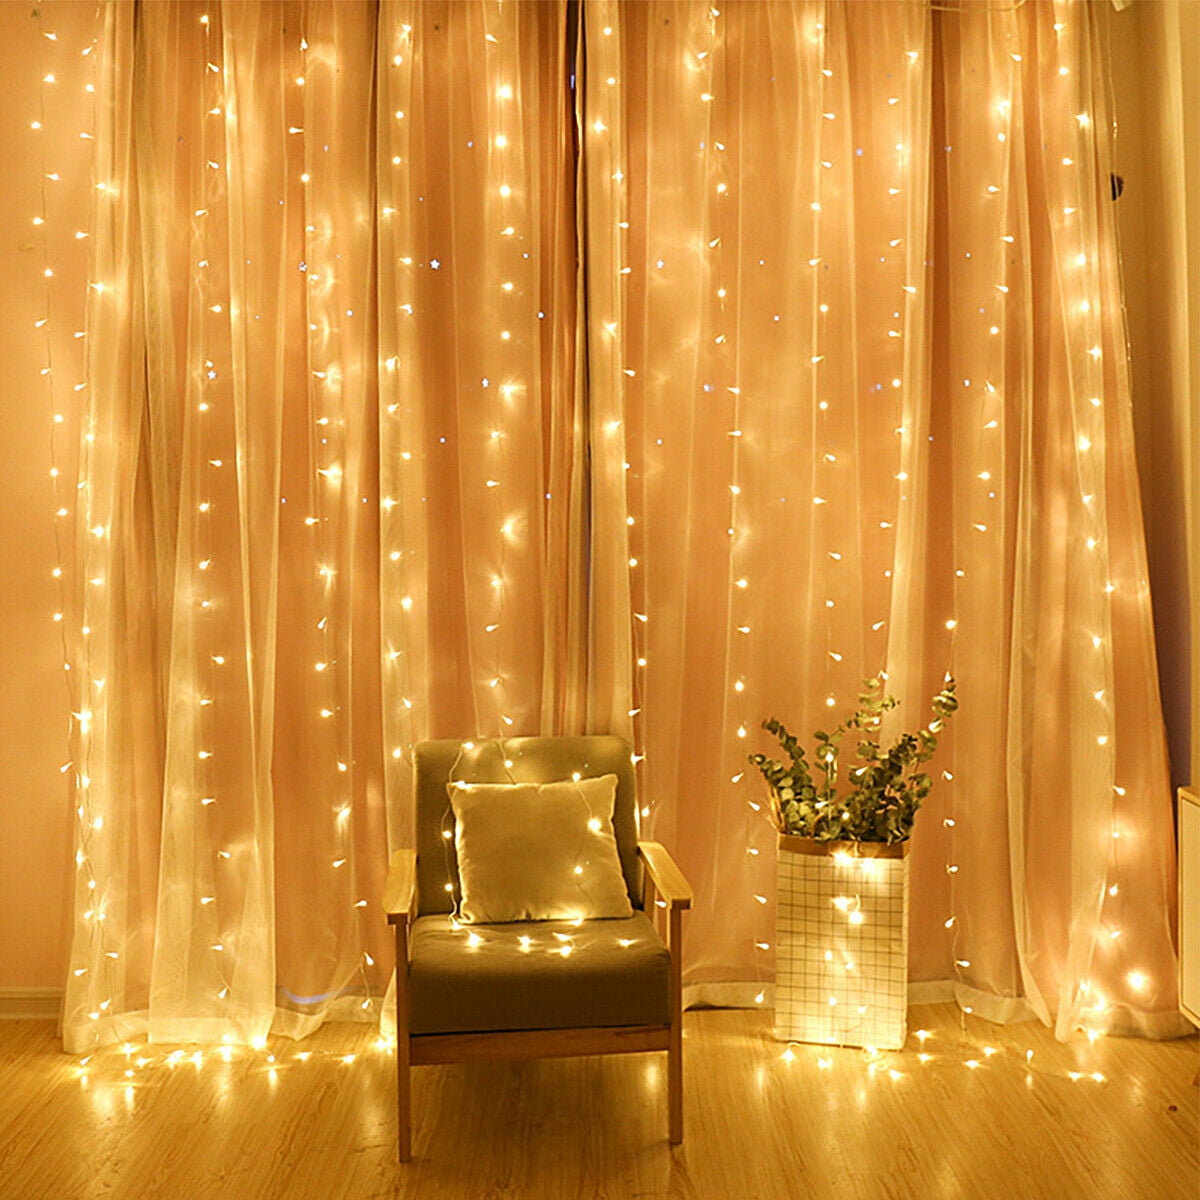 LED Curtain String Light  Fiary Garland Wedding Christmas Party Decoration 